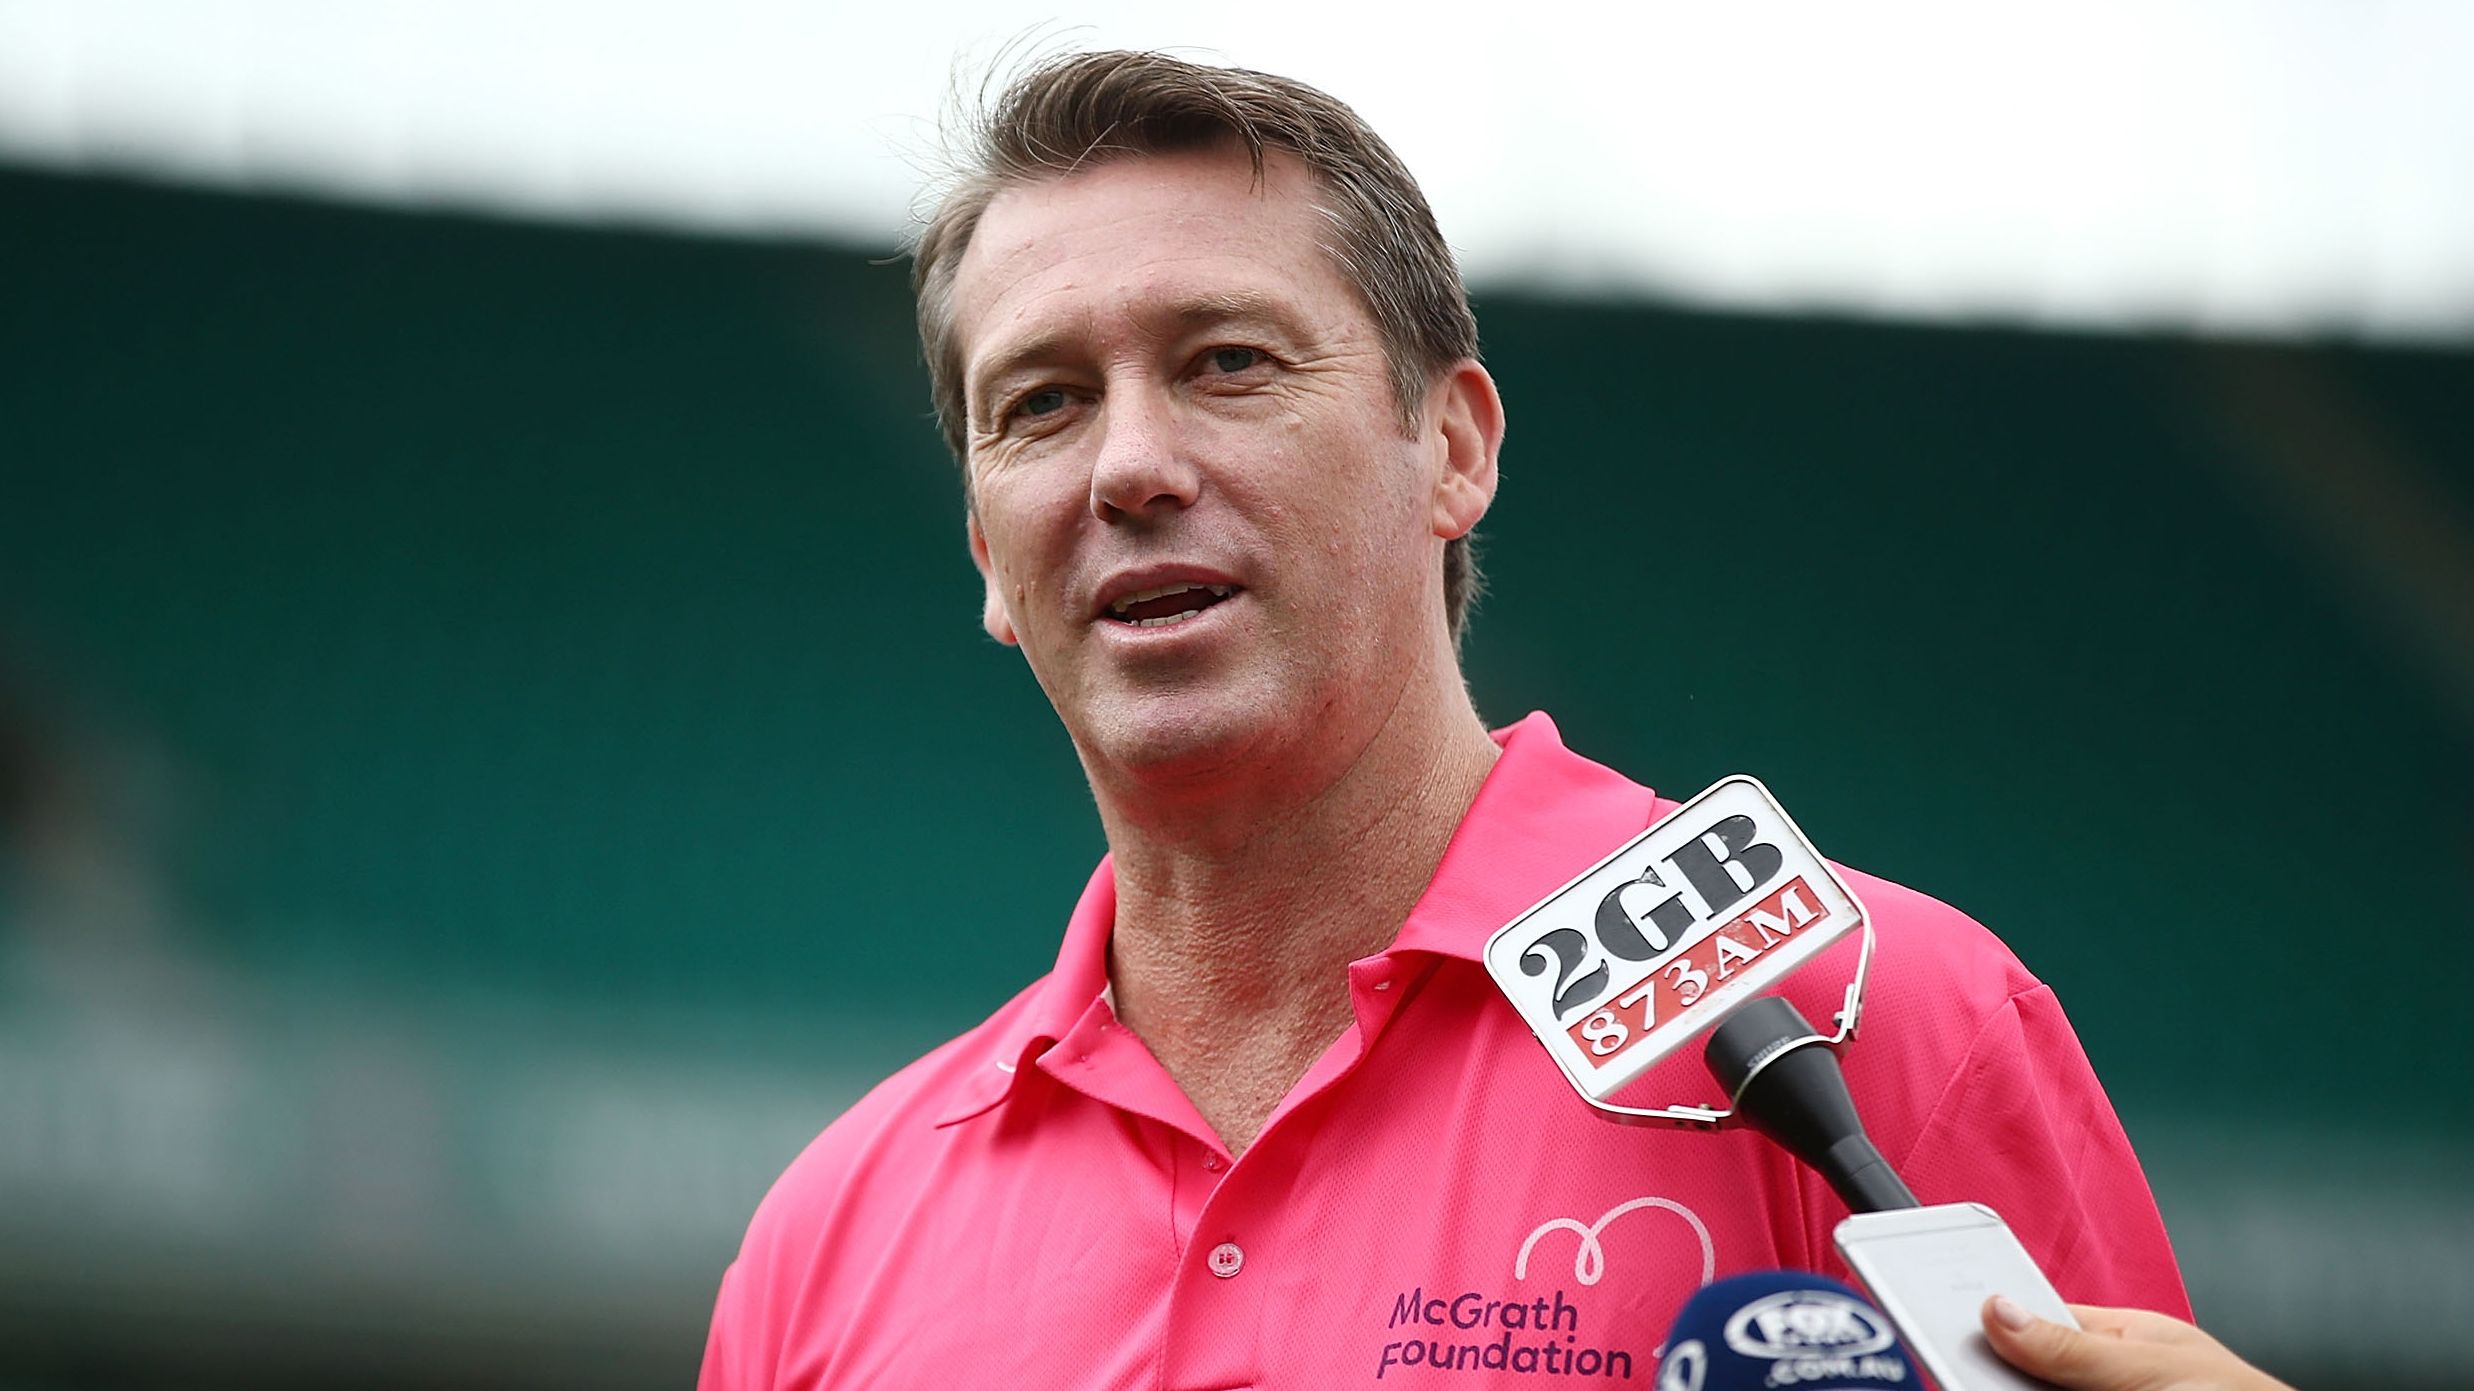 Glenn McGrath to miss the start of the Pink Test after being diagnosed with COVID